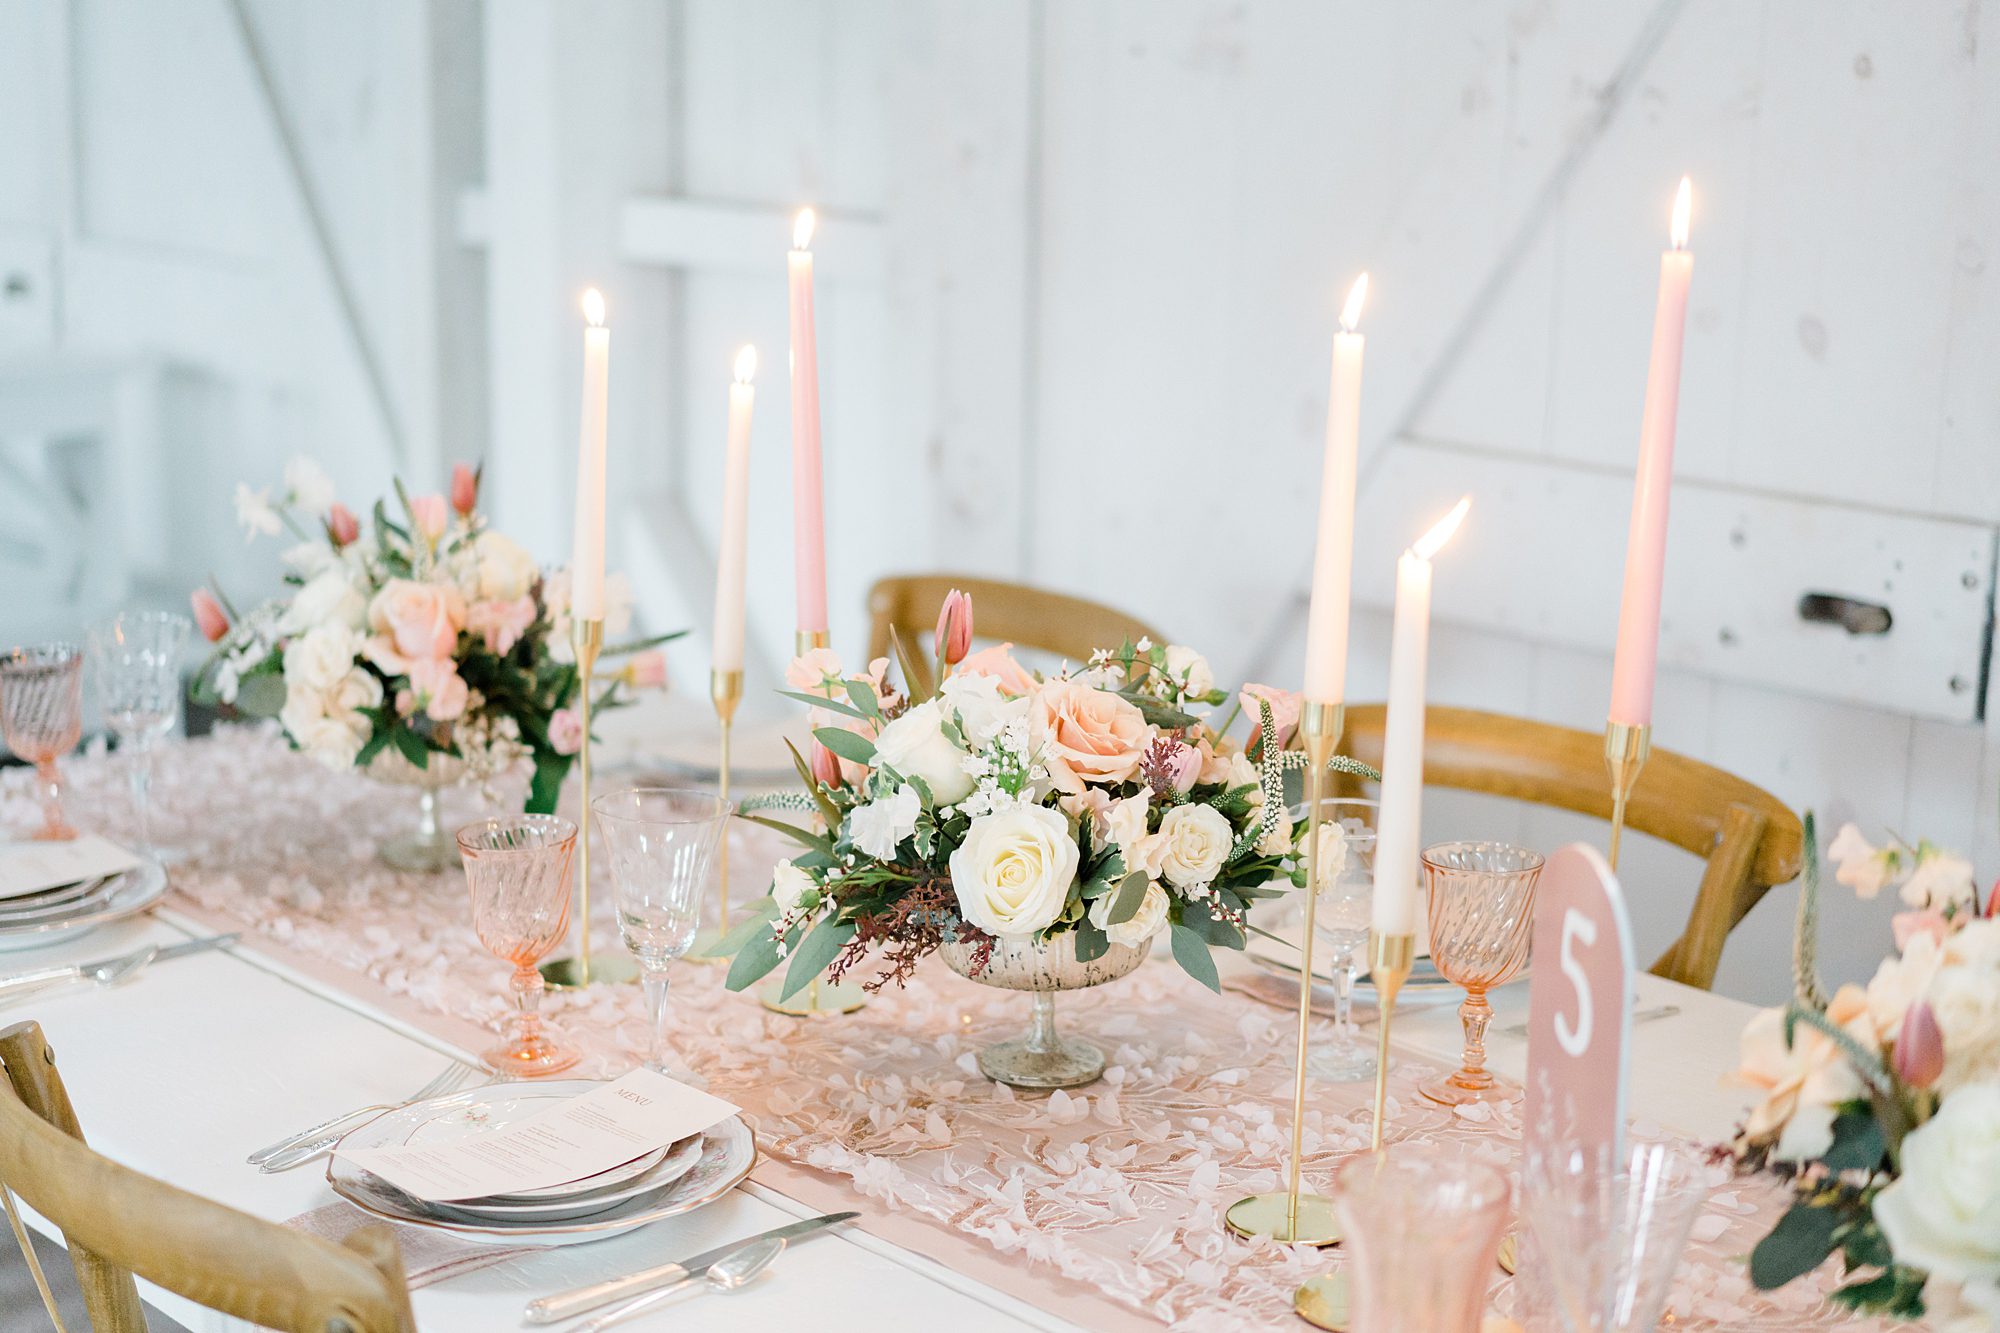 tablescape and centerpieces from Boathouse Chapel at Bonnet Island | Styled Wedding Shoot